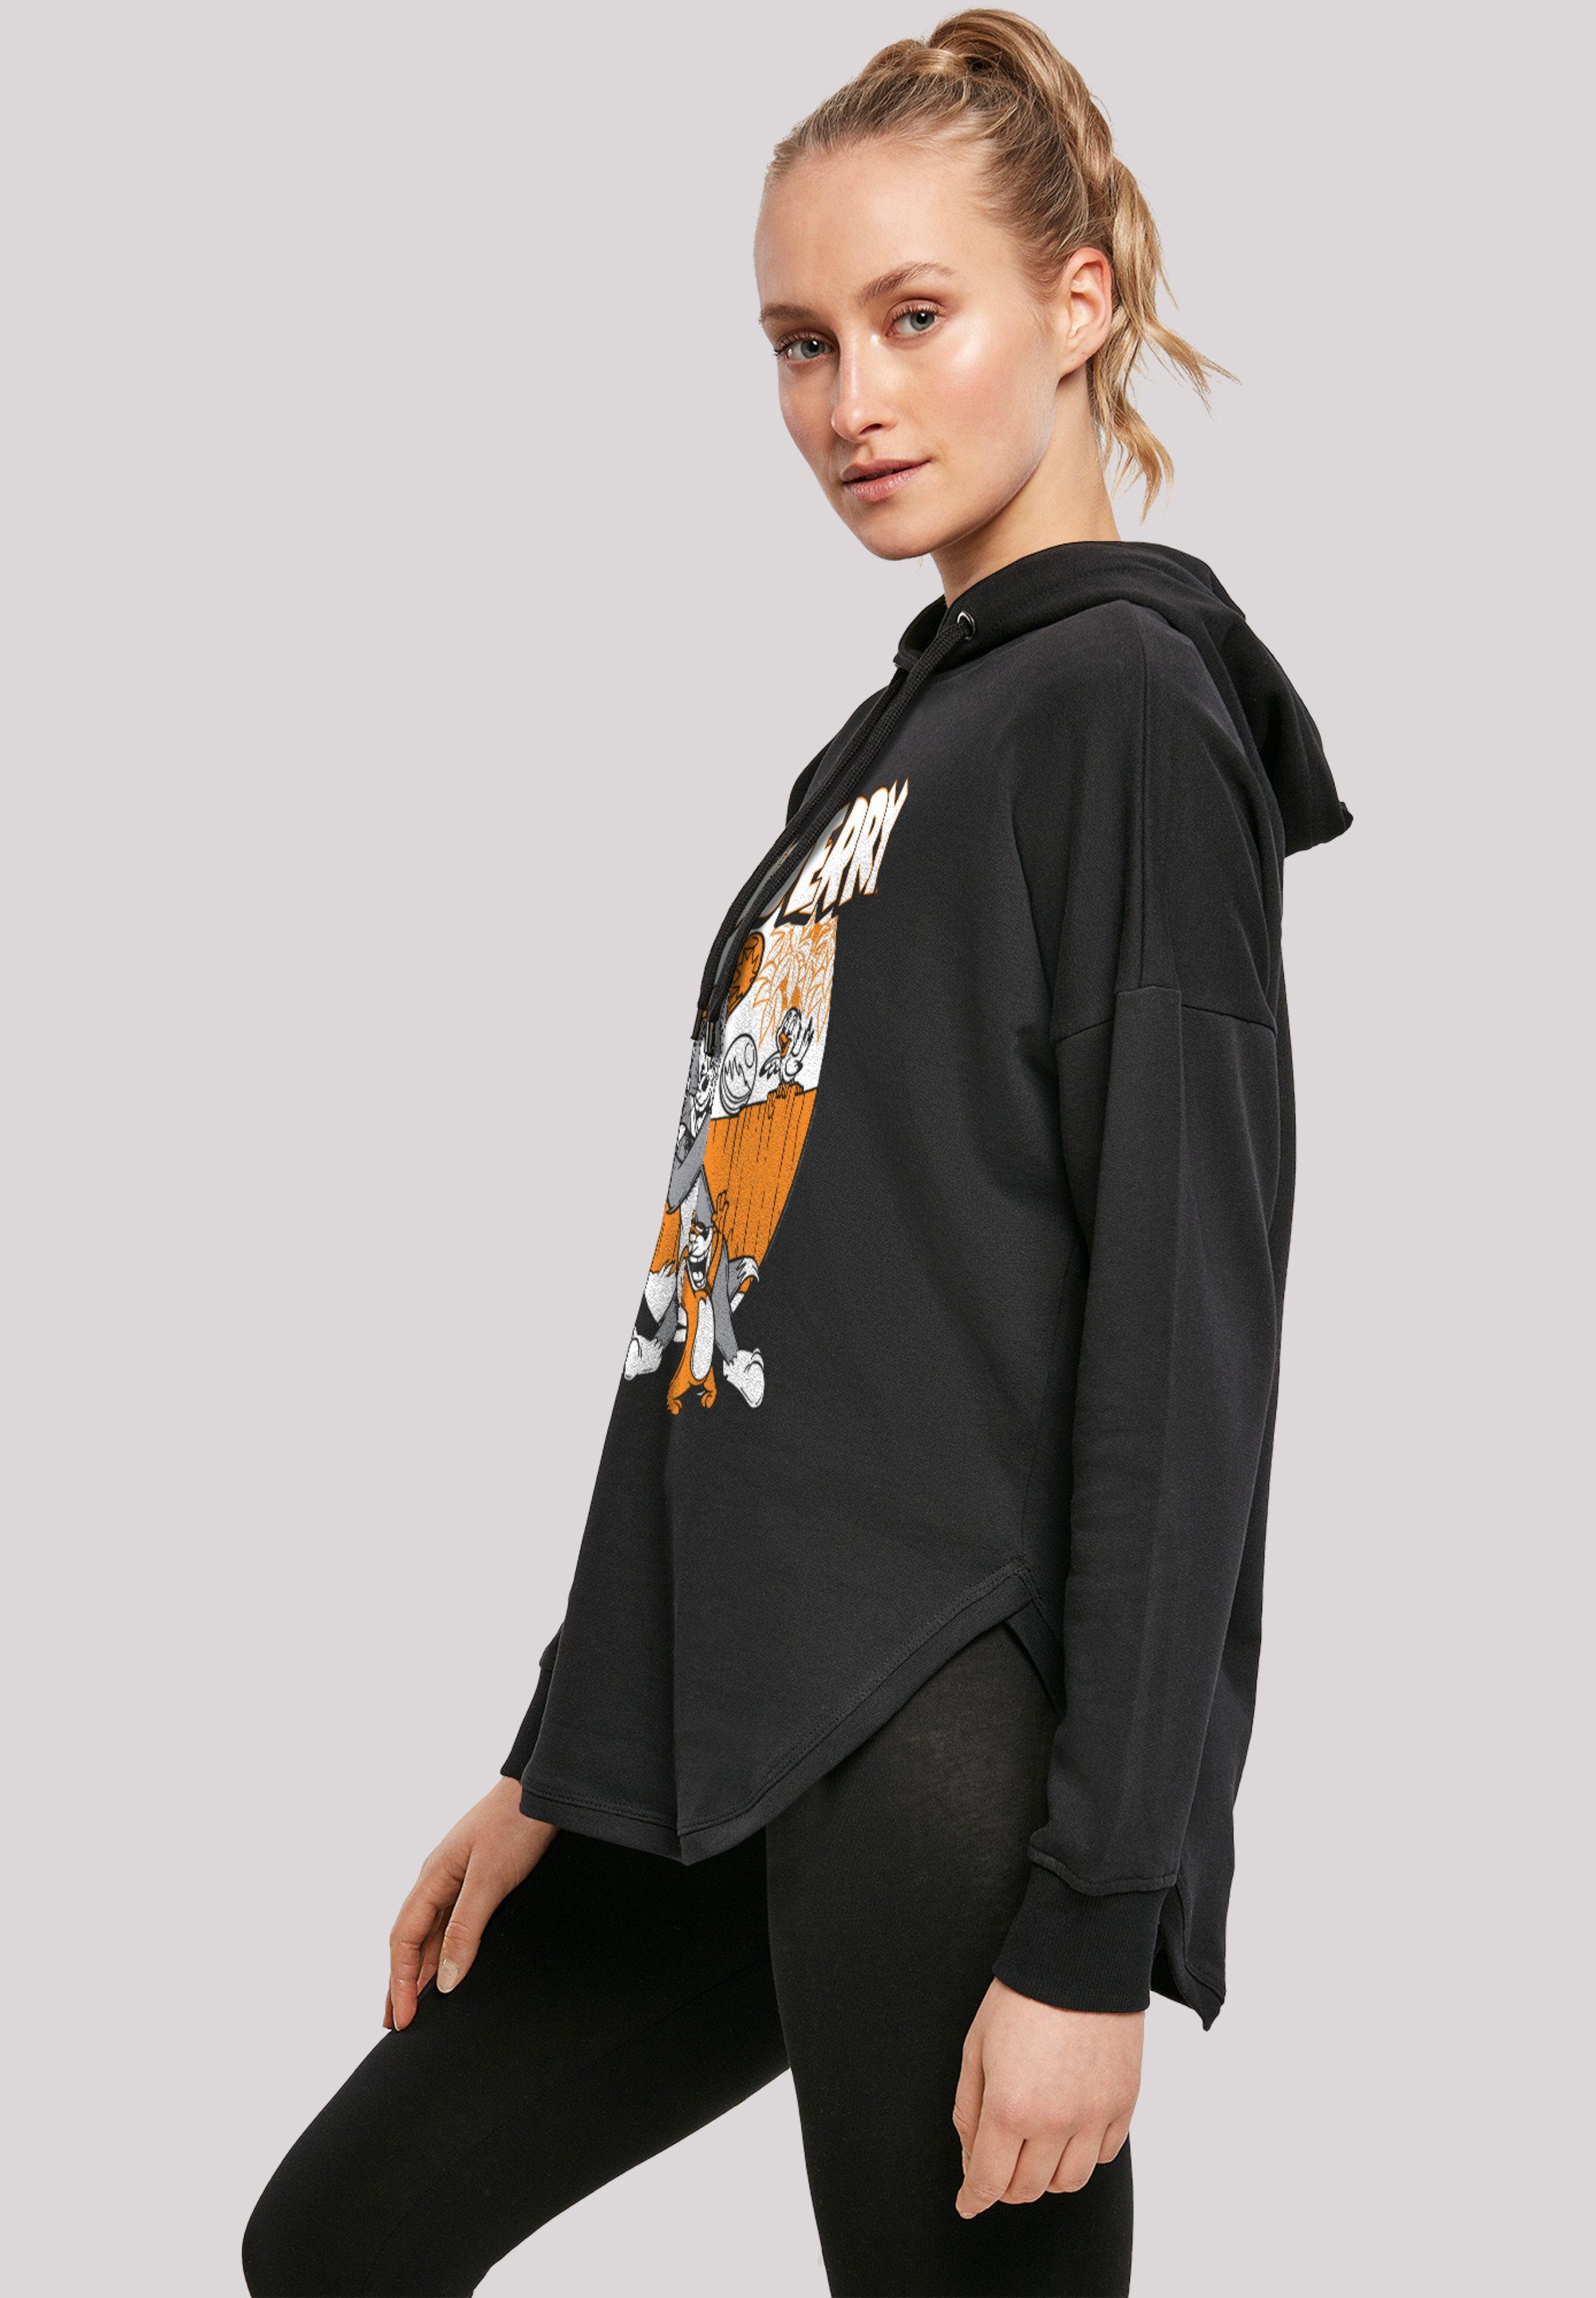 Jerry with F4NT4STIC Damen Baseball Ladies Kapuzenpullover Hoody Oversized Tom (1-tlg) And Play